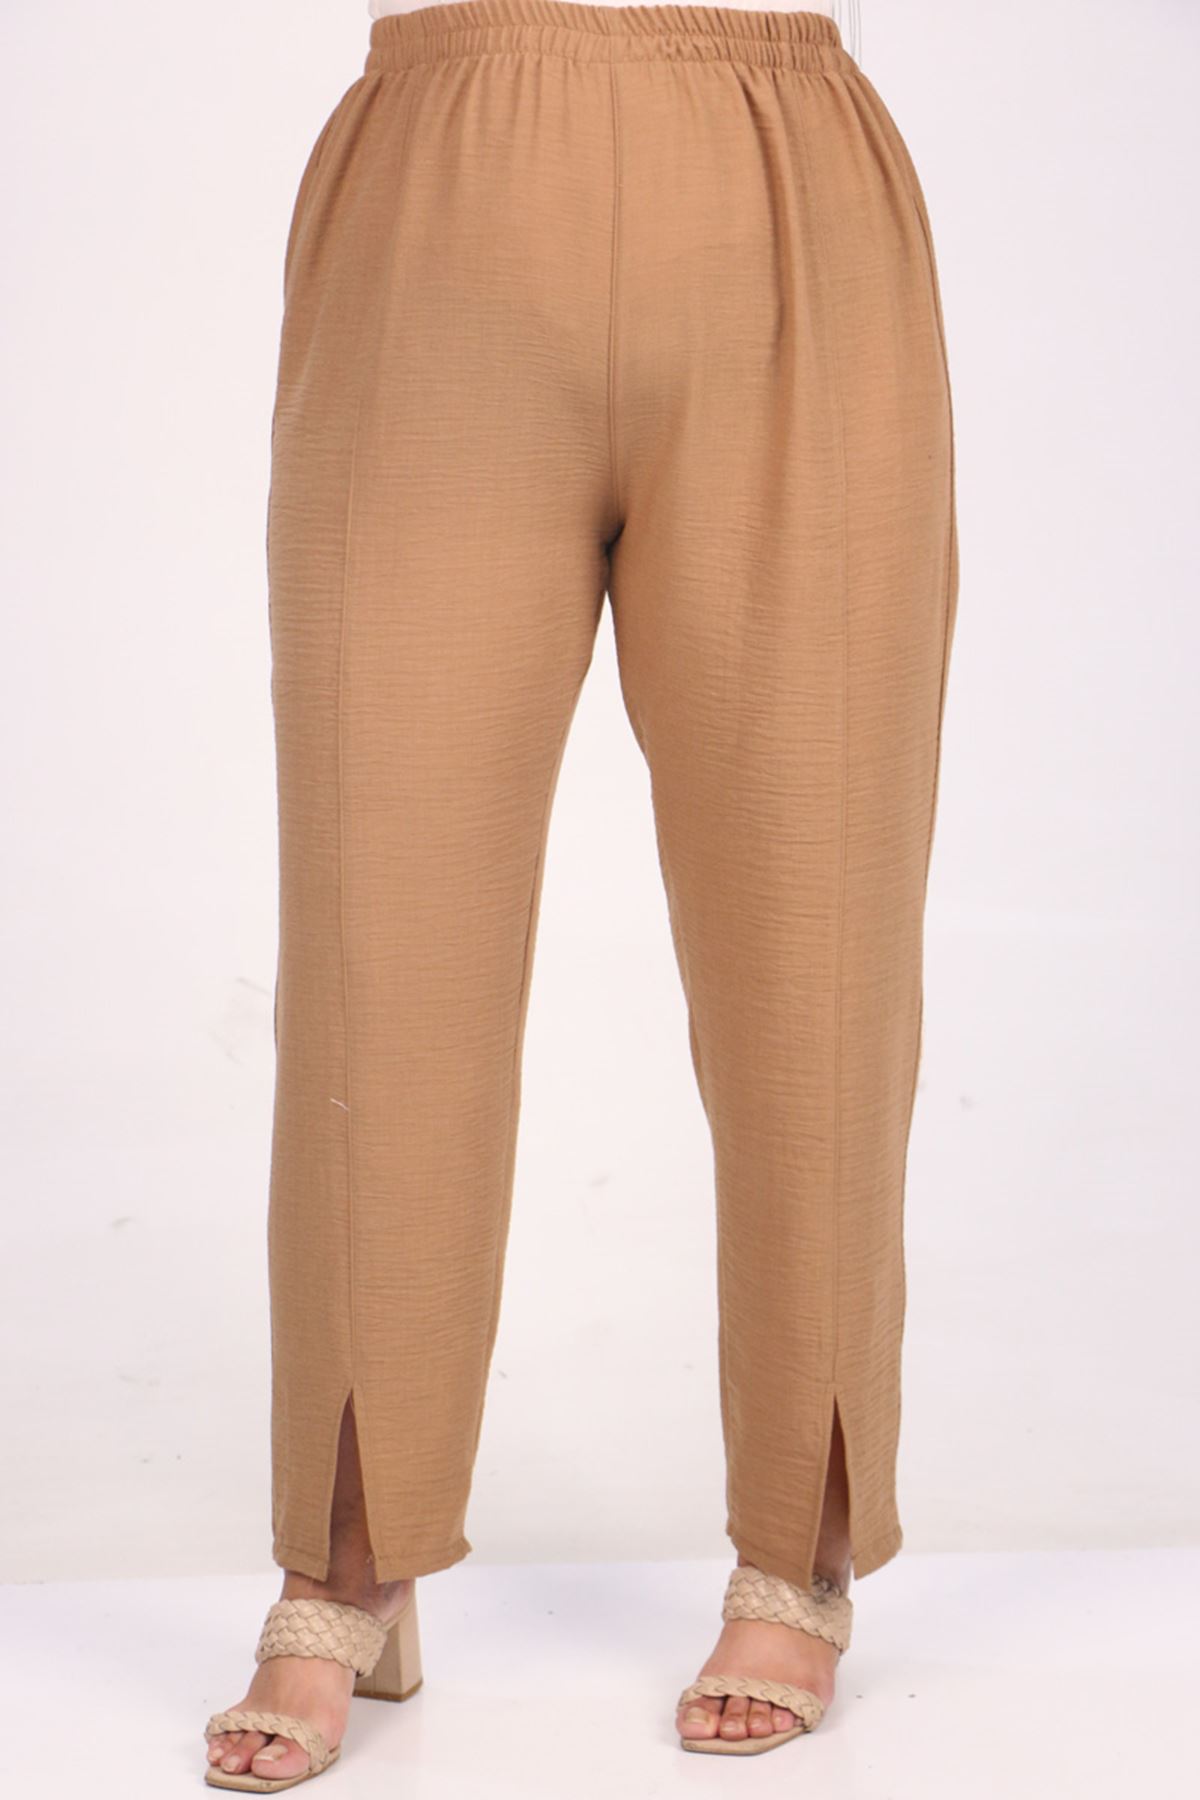 37038 Large Size Linen Airobin Button Detailed Trousers Suit -Brown